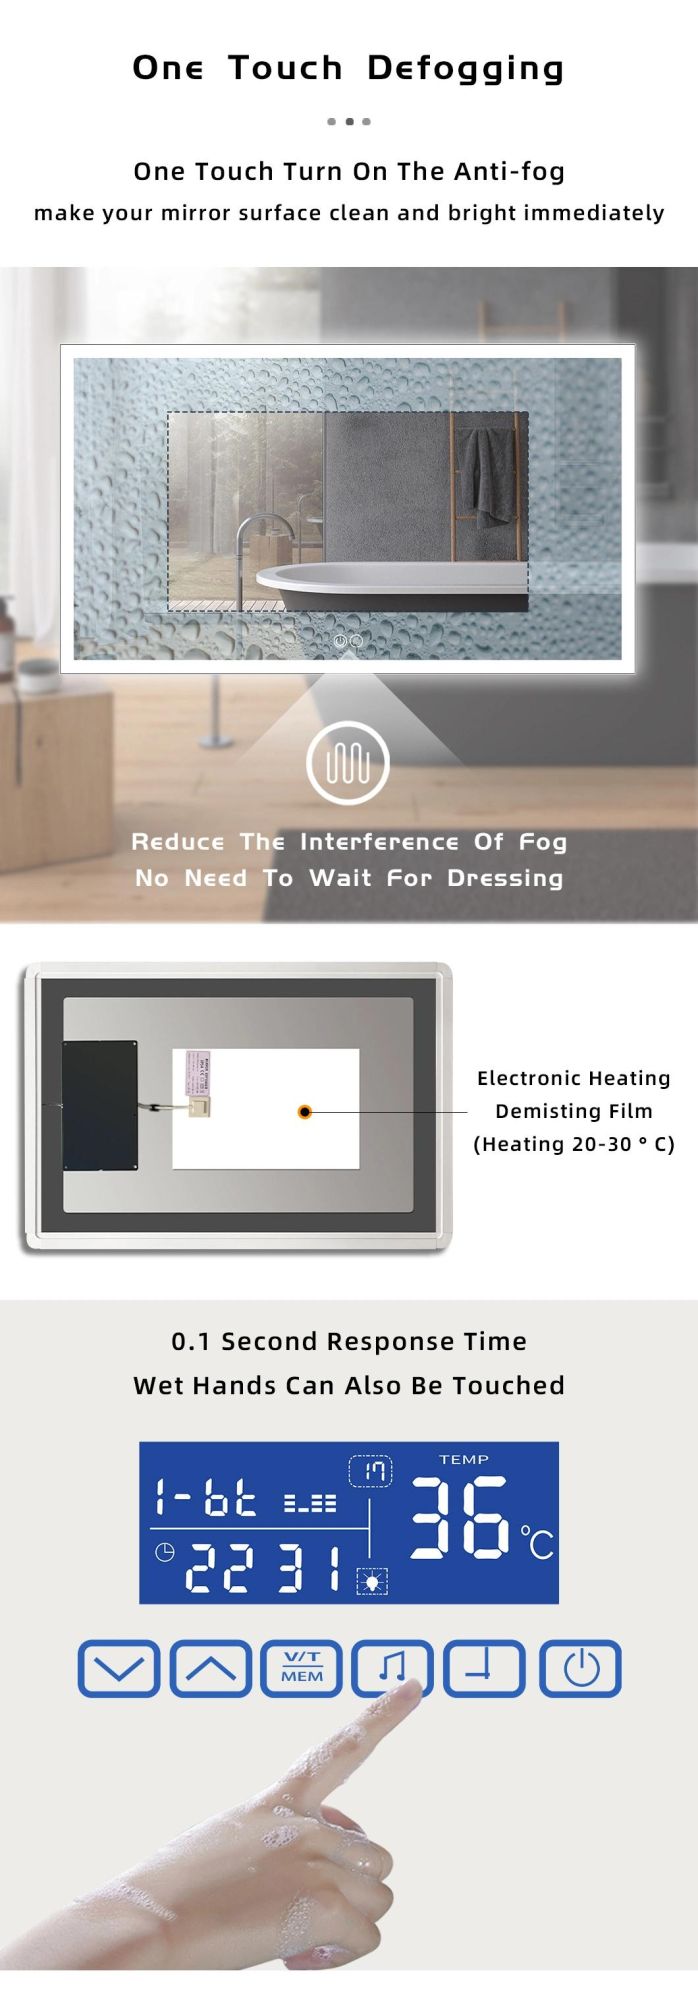 Luxury Home Decorative Rectangle Bluetooth Smart Mirror Wholesale LED Bathroom Backlit Wall Glass Vanity Dimmable Touch Switch Light up Wall Makeup Smart Mirror